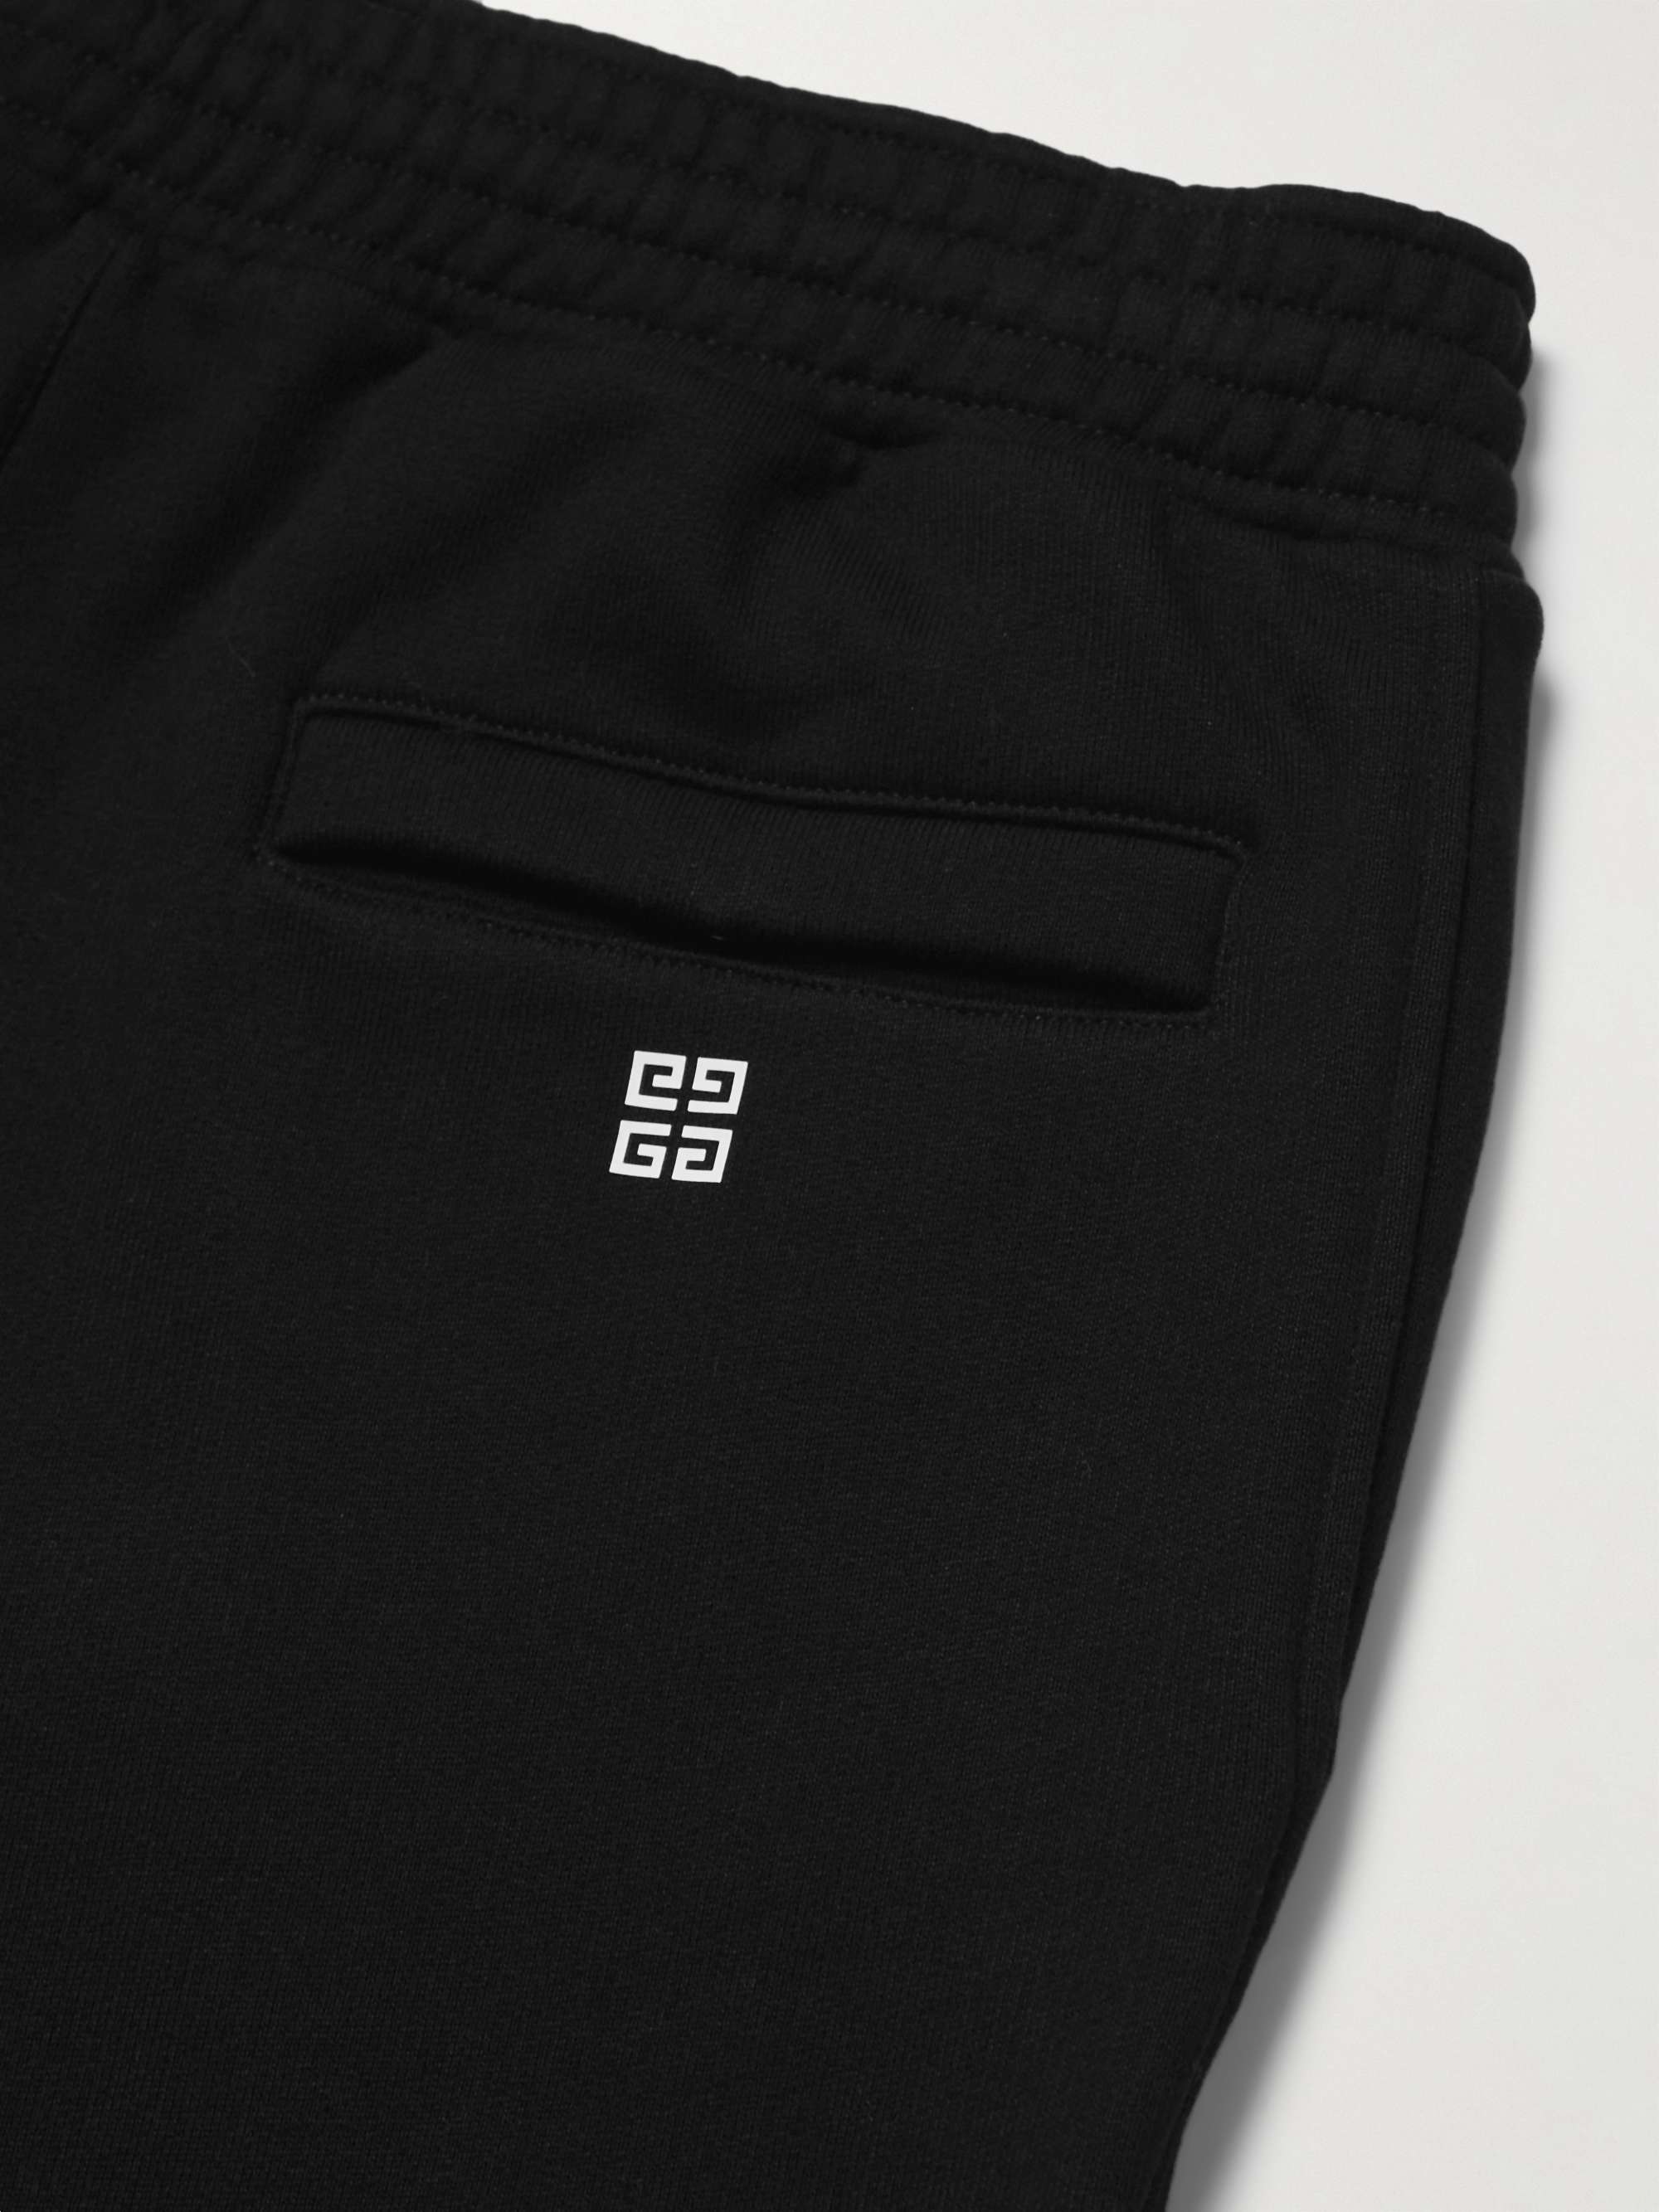 GIVENCHY Slim-Fit Tapered Logo-Print Cotton-Jersey Sweatpants